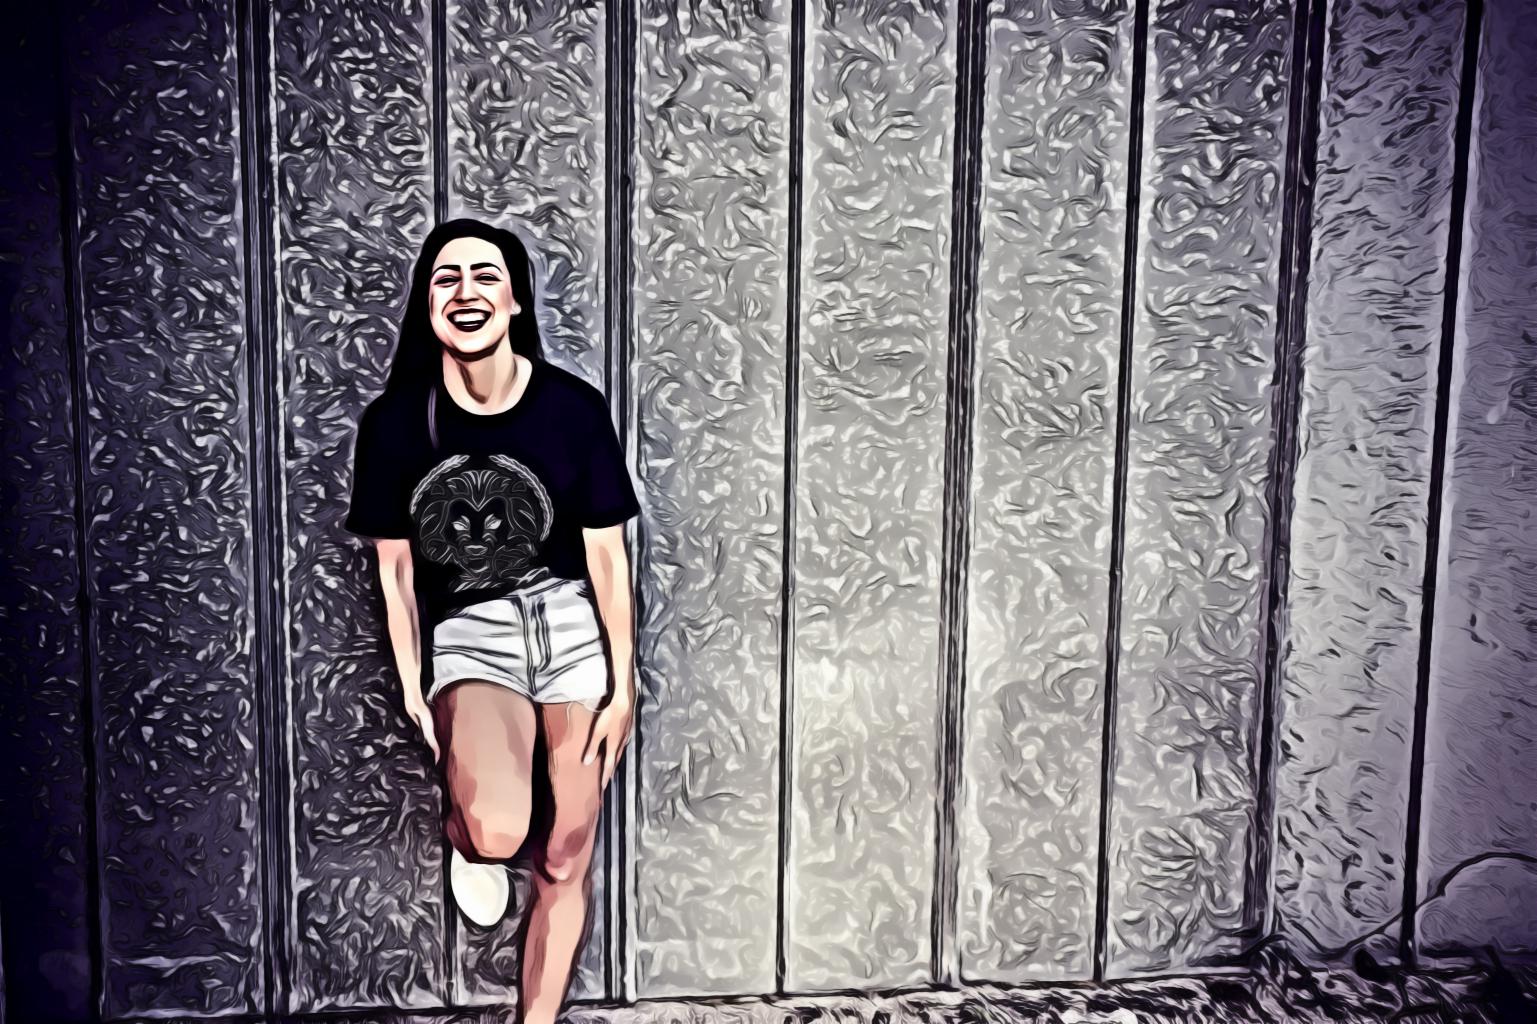 Woman Wearing Black and White Crew-neck T-shirt and Gray Denim Short Shorts Outfit Leaning on Gray Wall